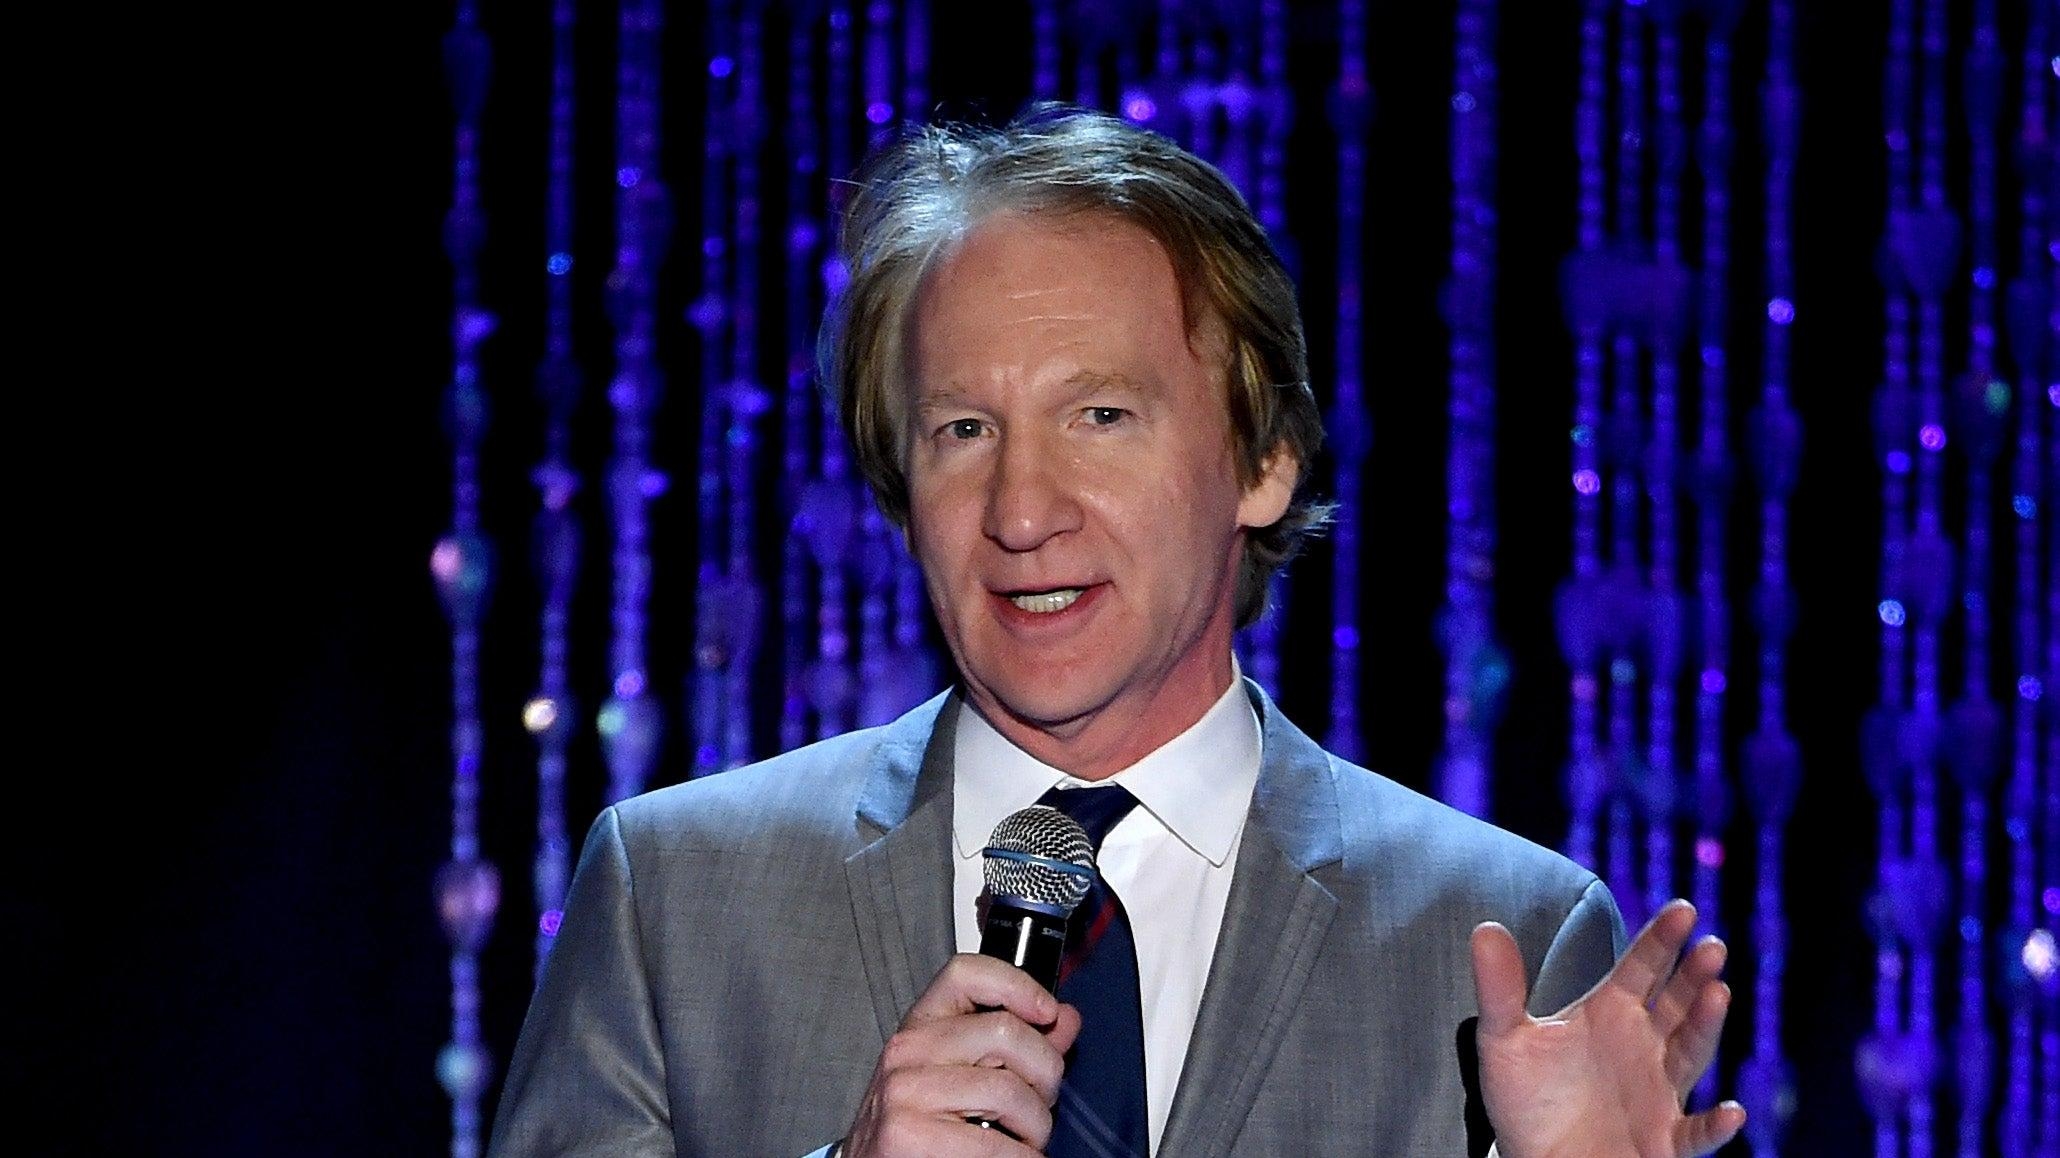 Real Time taping canceled after Bill Maher tests positive for COVID-19